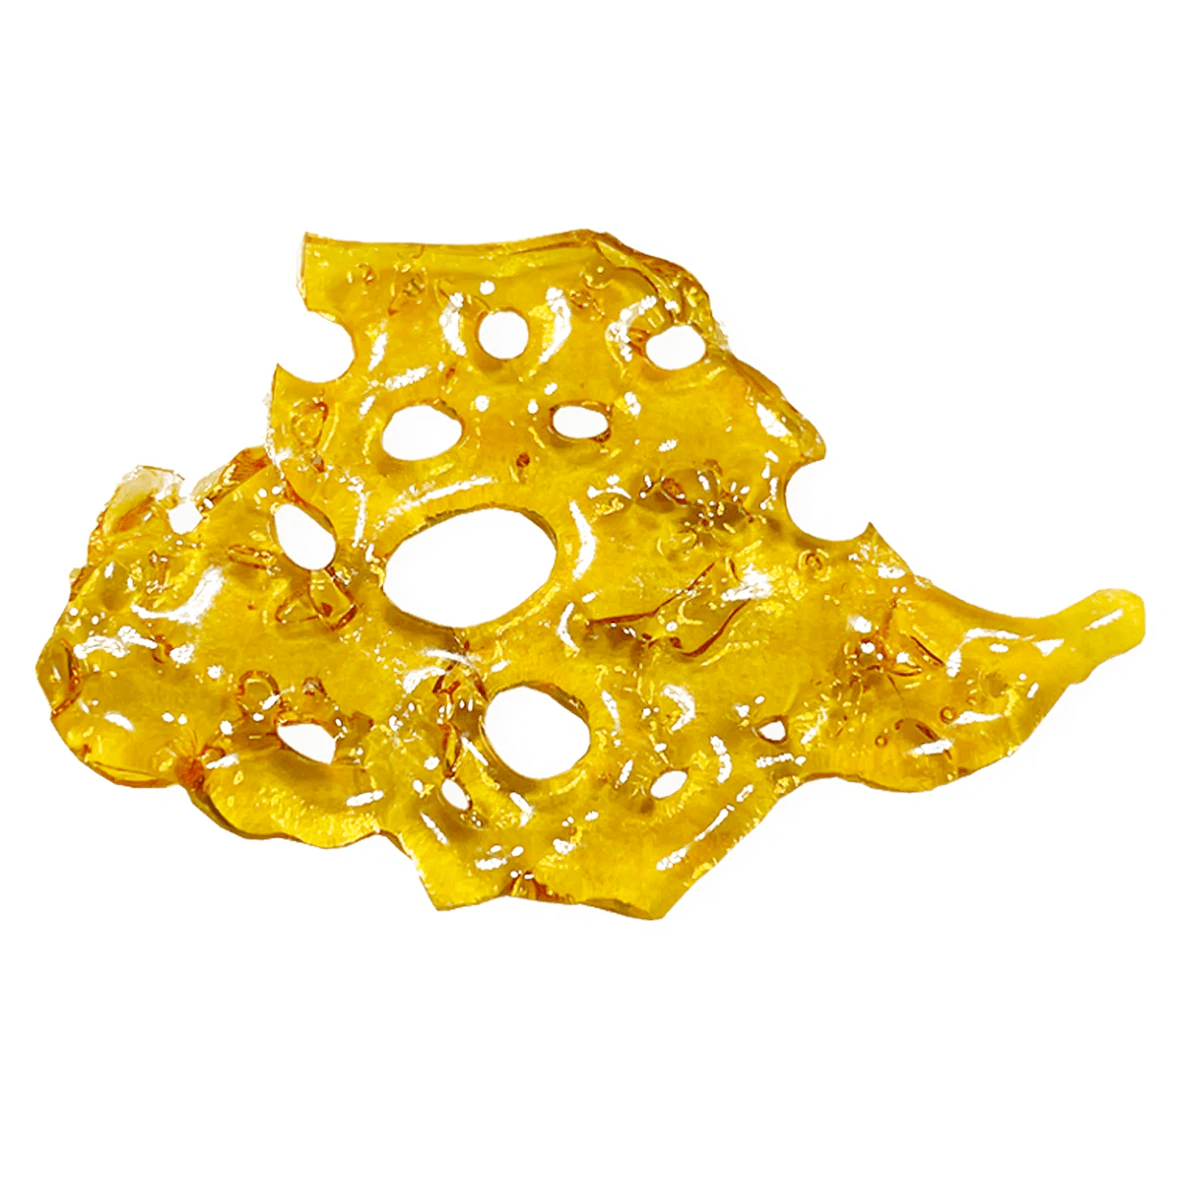 Dymond Concentrates 1g Shatters